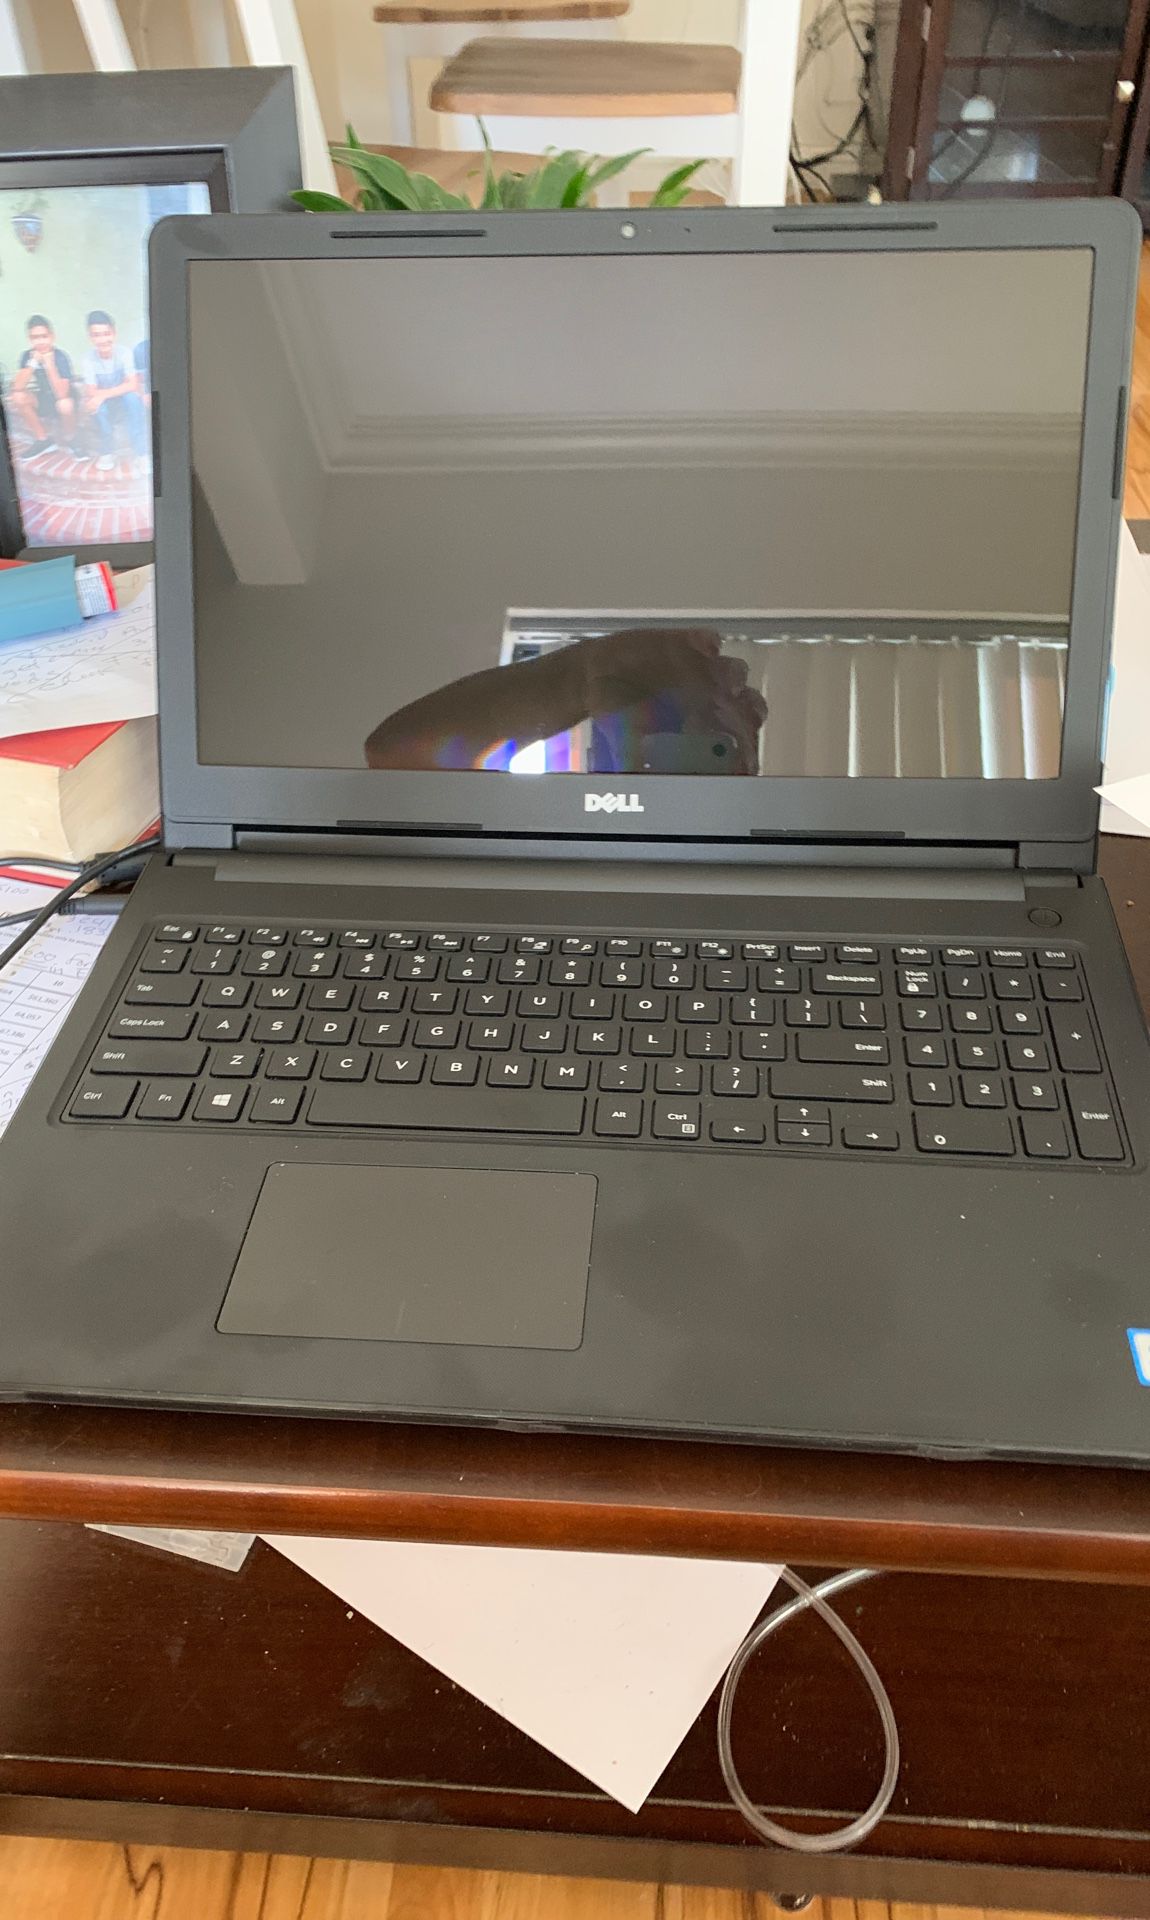 Few days old Dell Inspiron 15,, 3000 series, 3567, blacklaptop 15.6 in screen,